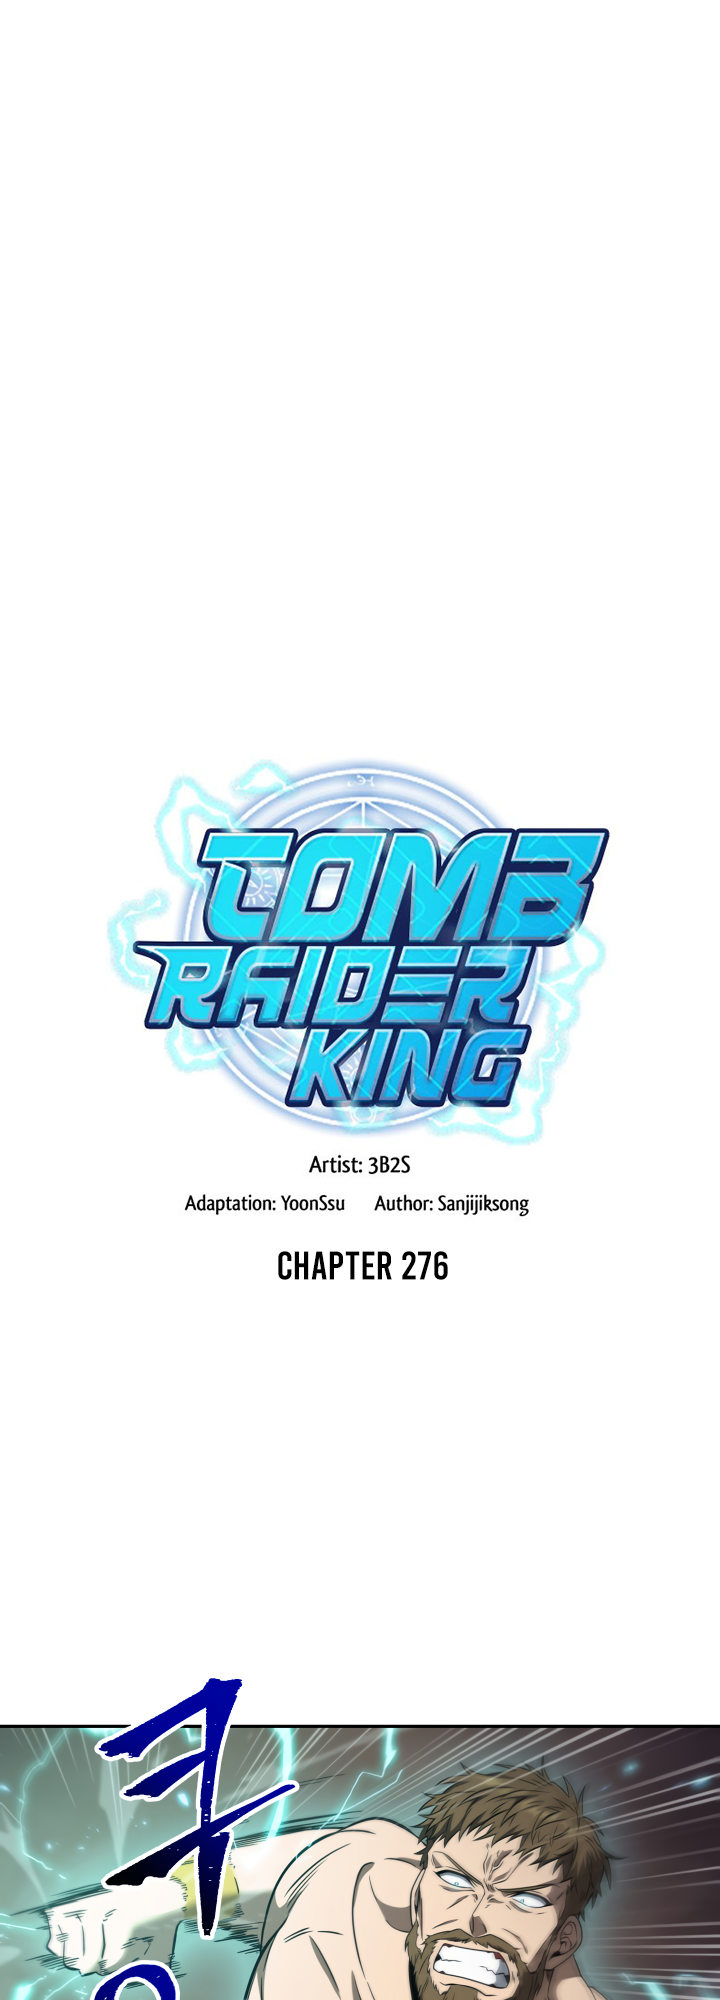 Tomb Raider King - Chapter 276 Page 2